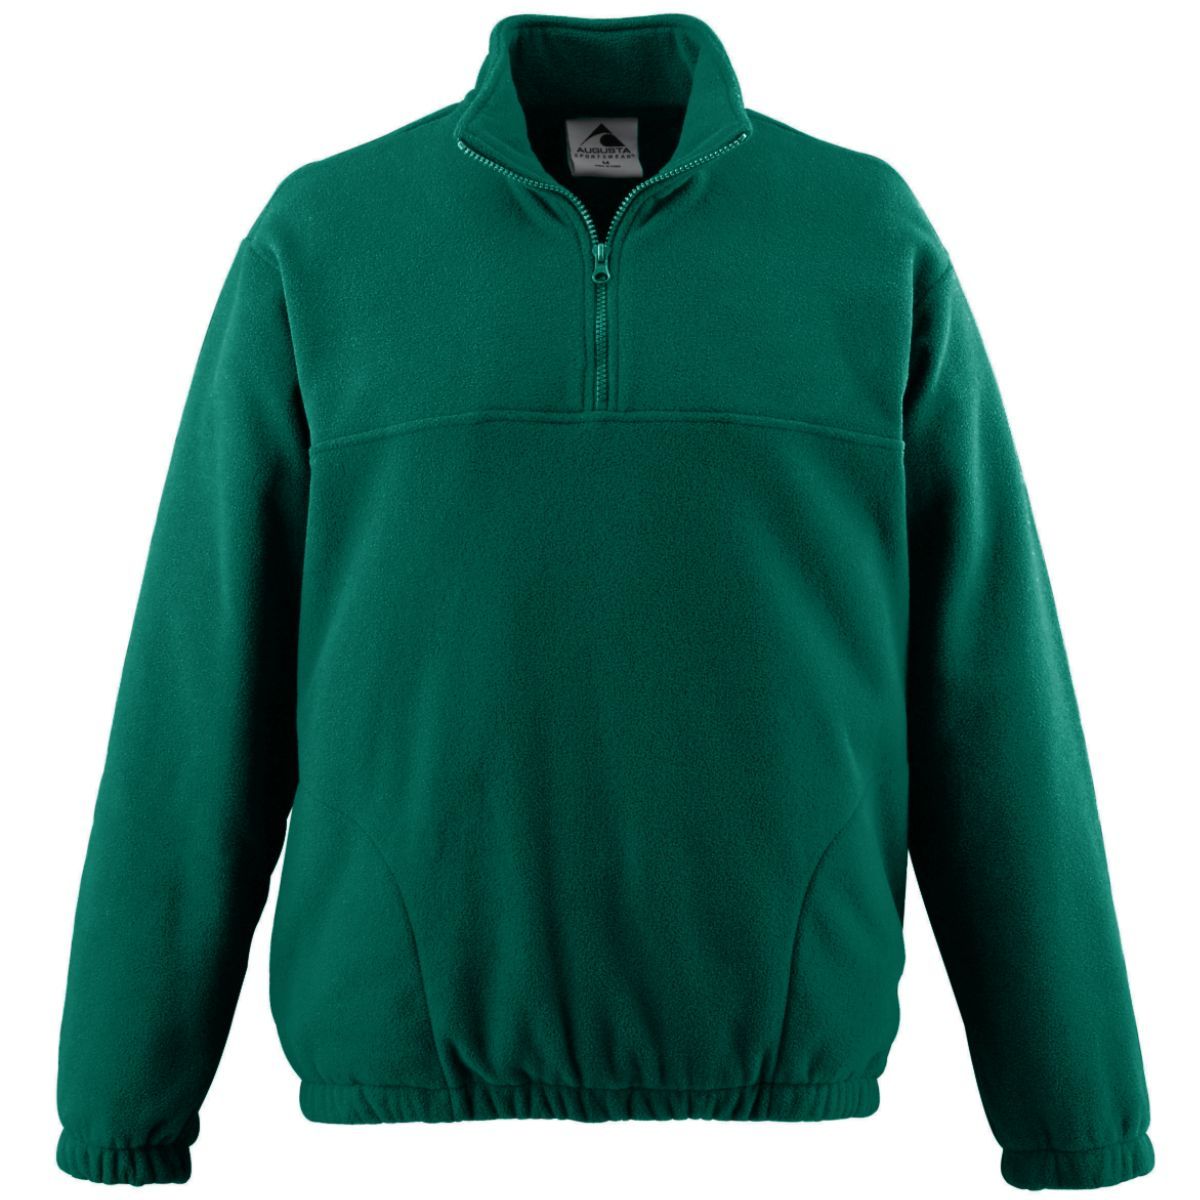 Augusta Sportswear Chill Fleece Half-Zip Pullover in Dark Green  -Part of the Adult, Adult-Pullover, Augusta-Products, Outerwear product lines at KanaleyCreations.com